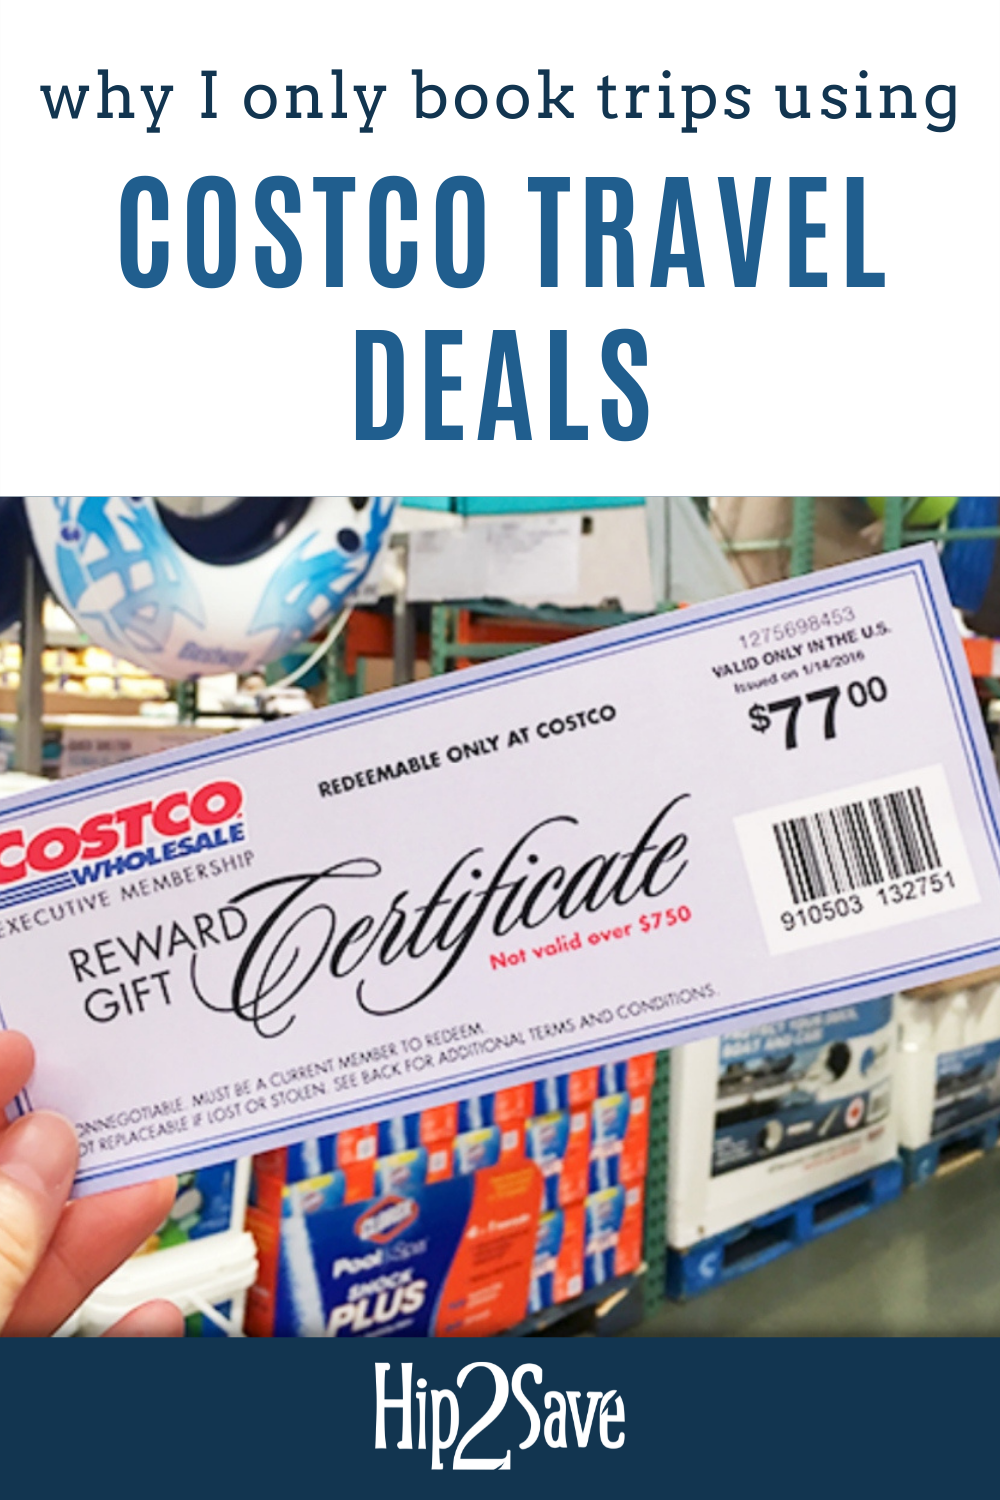 Costco Travel Has Super Cheap Vacation Deals & There's